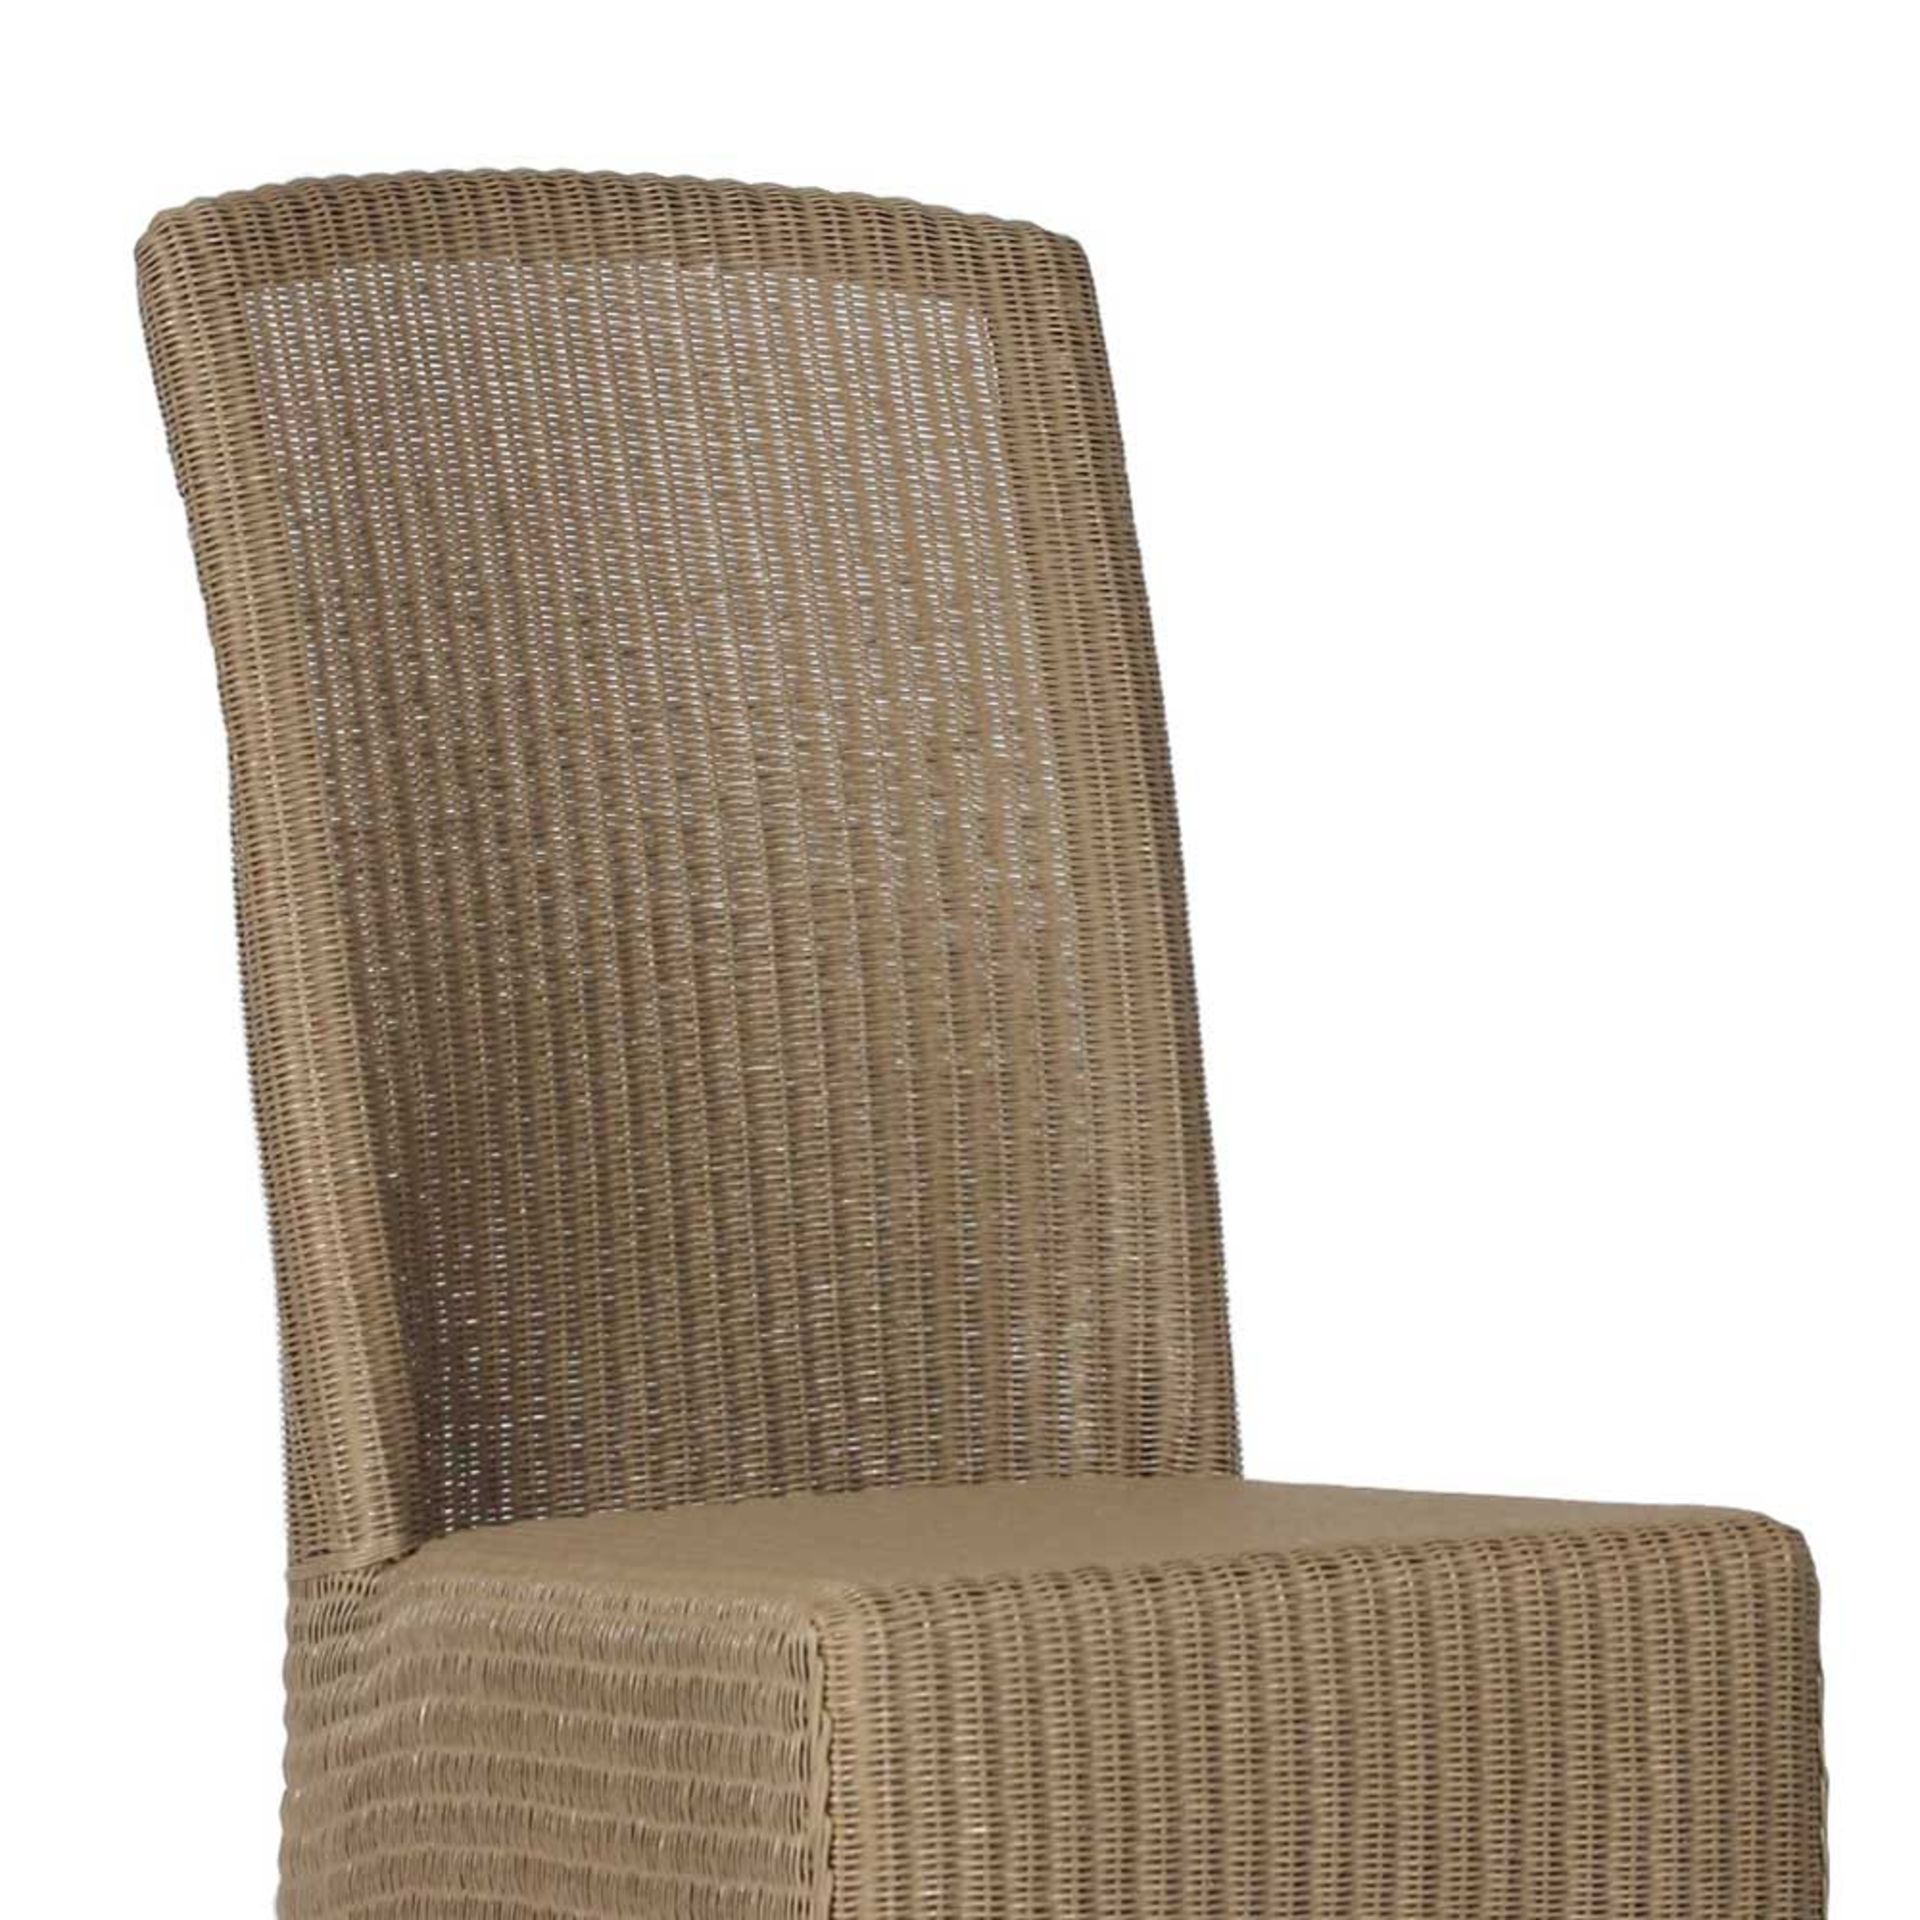 1 x Lloyd Loom Originals Sofia Woven Chair With Taupe Finish - RRP £198! - Image 3 of 3